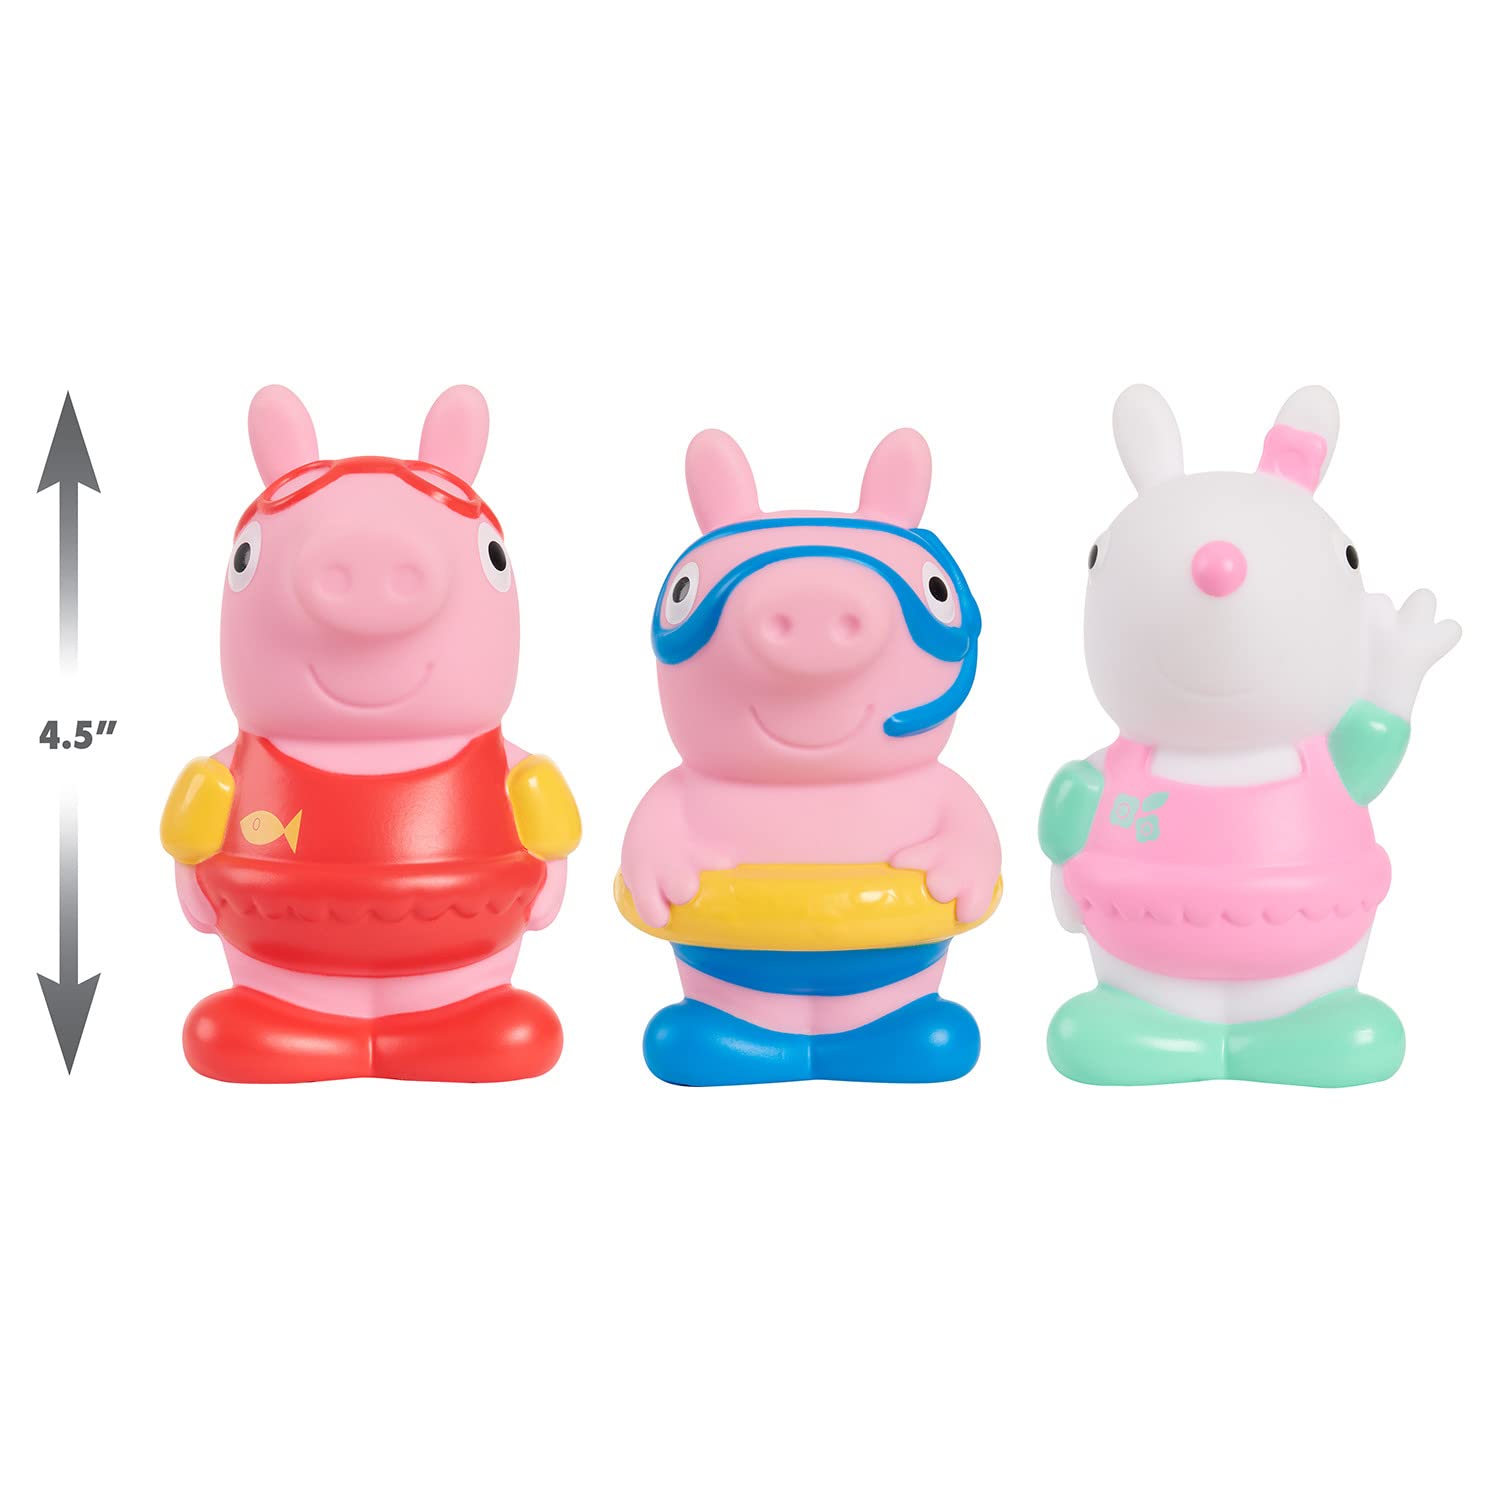 Peppa Pig Bath Toys 3-piece Set, Kids Toys for Ages 3 Up, Basket Stuffers and Small Gifts, Amazon Exclusive